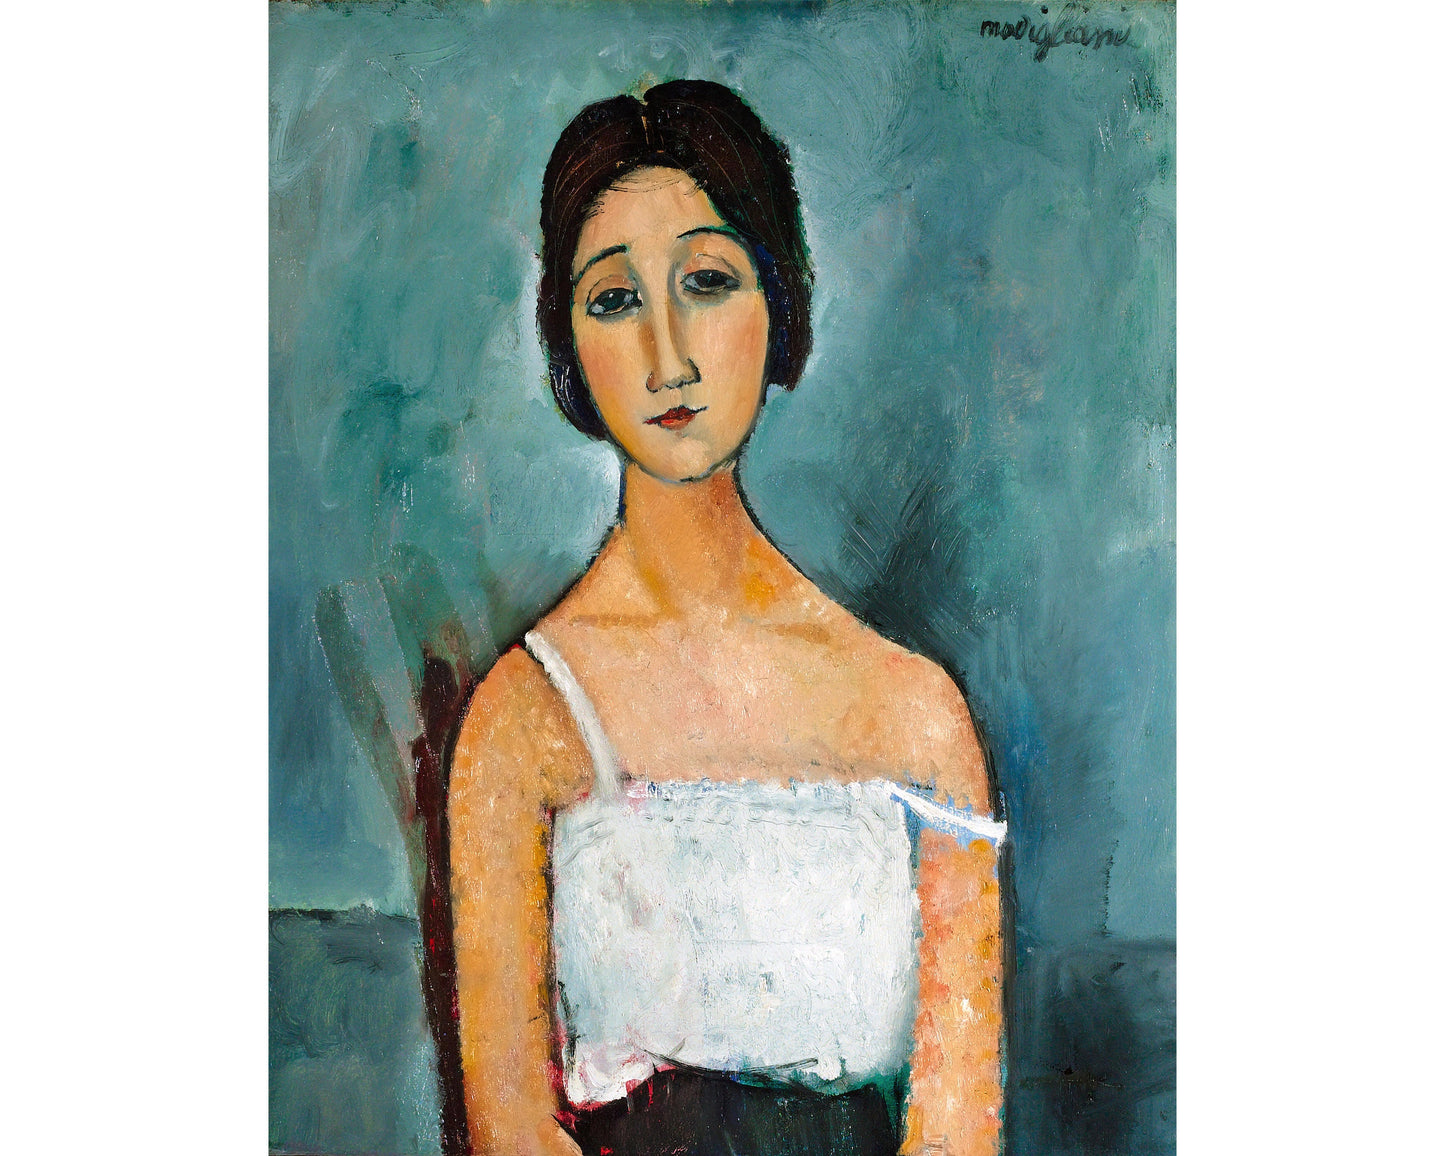 Portrait of brunette woman | Christina by Amedeo Modigliani | Expressionist painting | Modern vintage wall art | Fits in standard frame